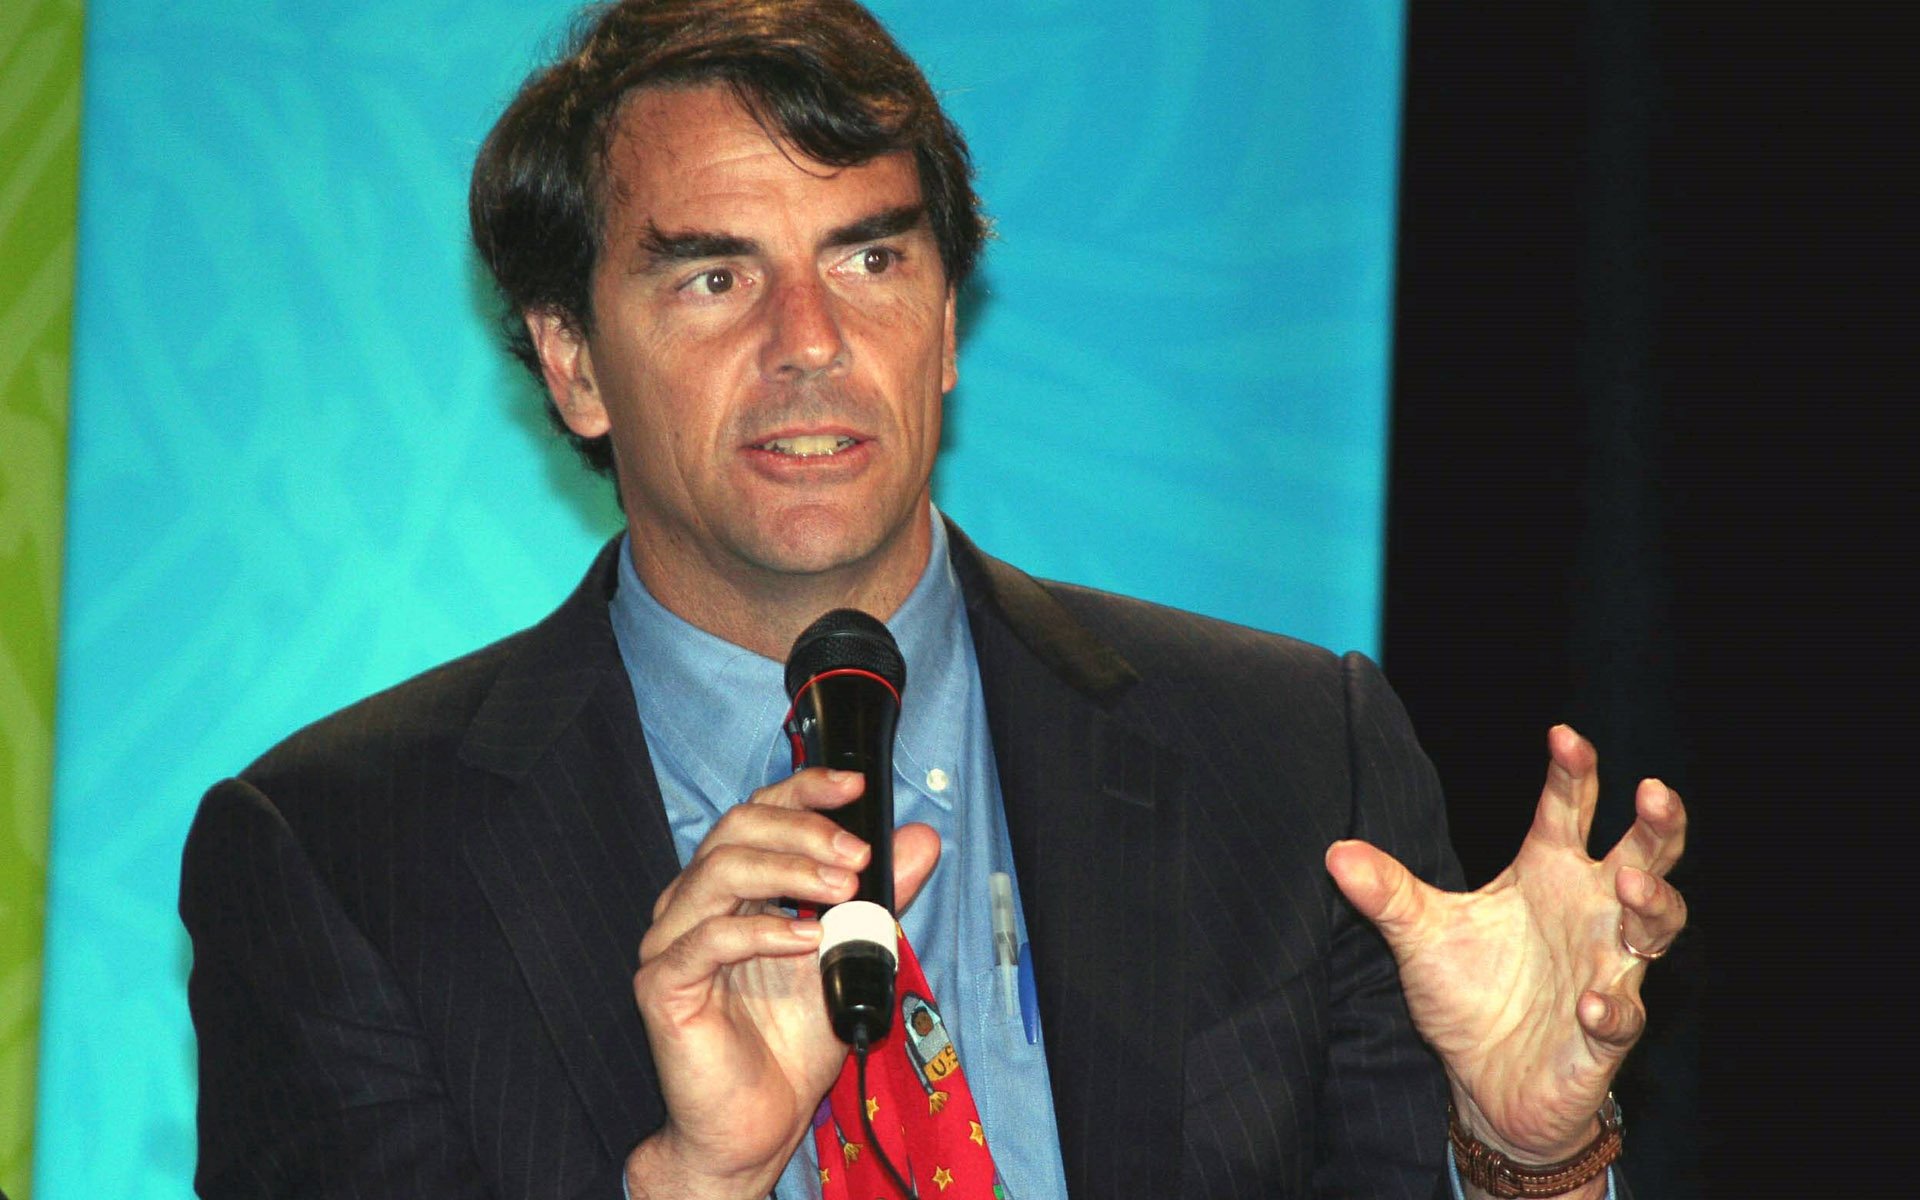 Stolpe Port Forbindelse Tim Draper: Why Would I Sell Bitcoin, The Future of Currency? |  Bitcoinist.com